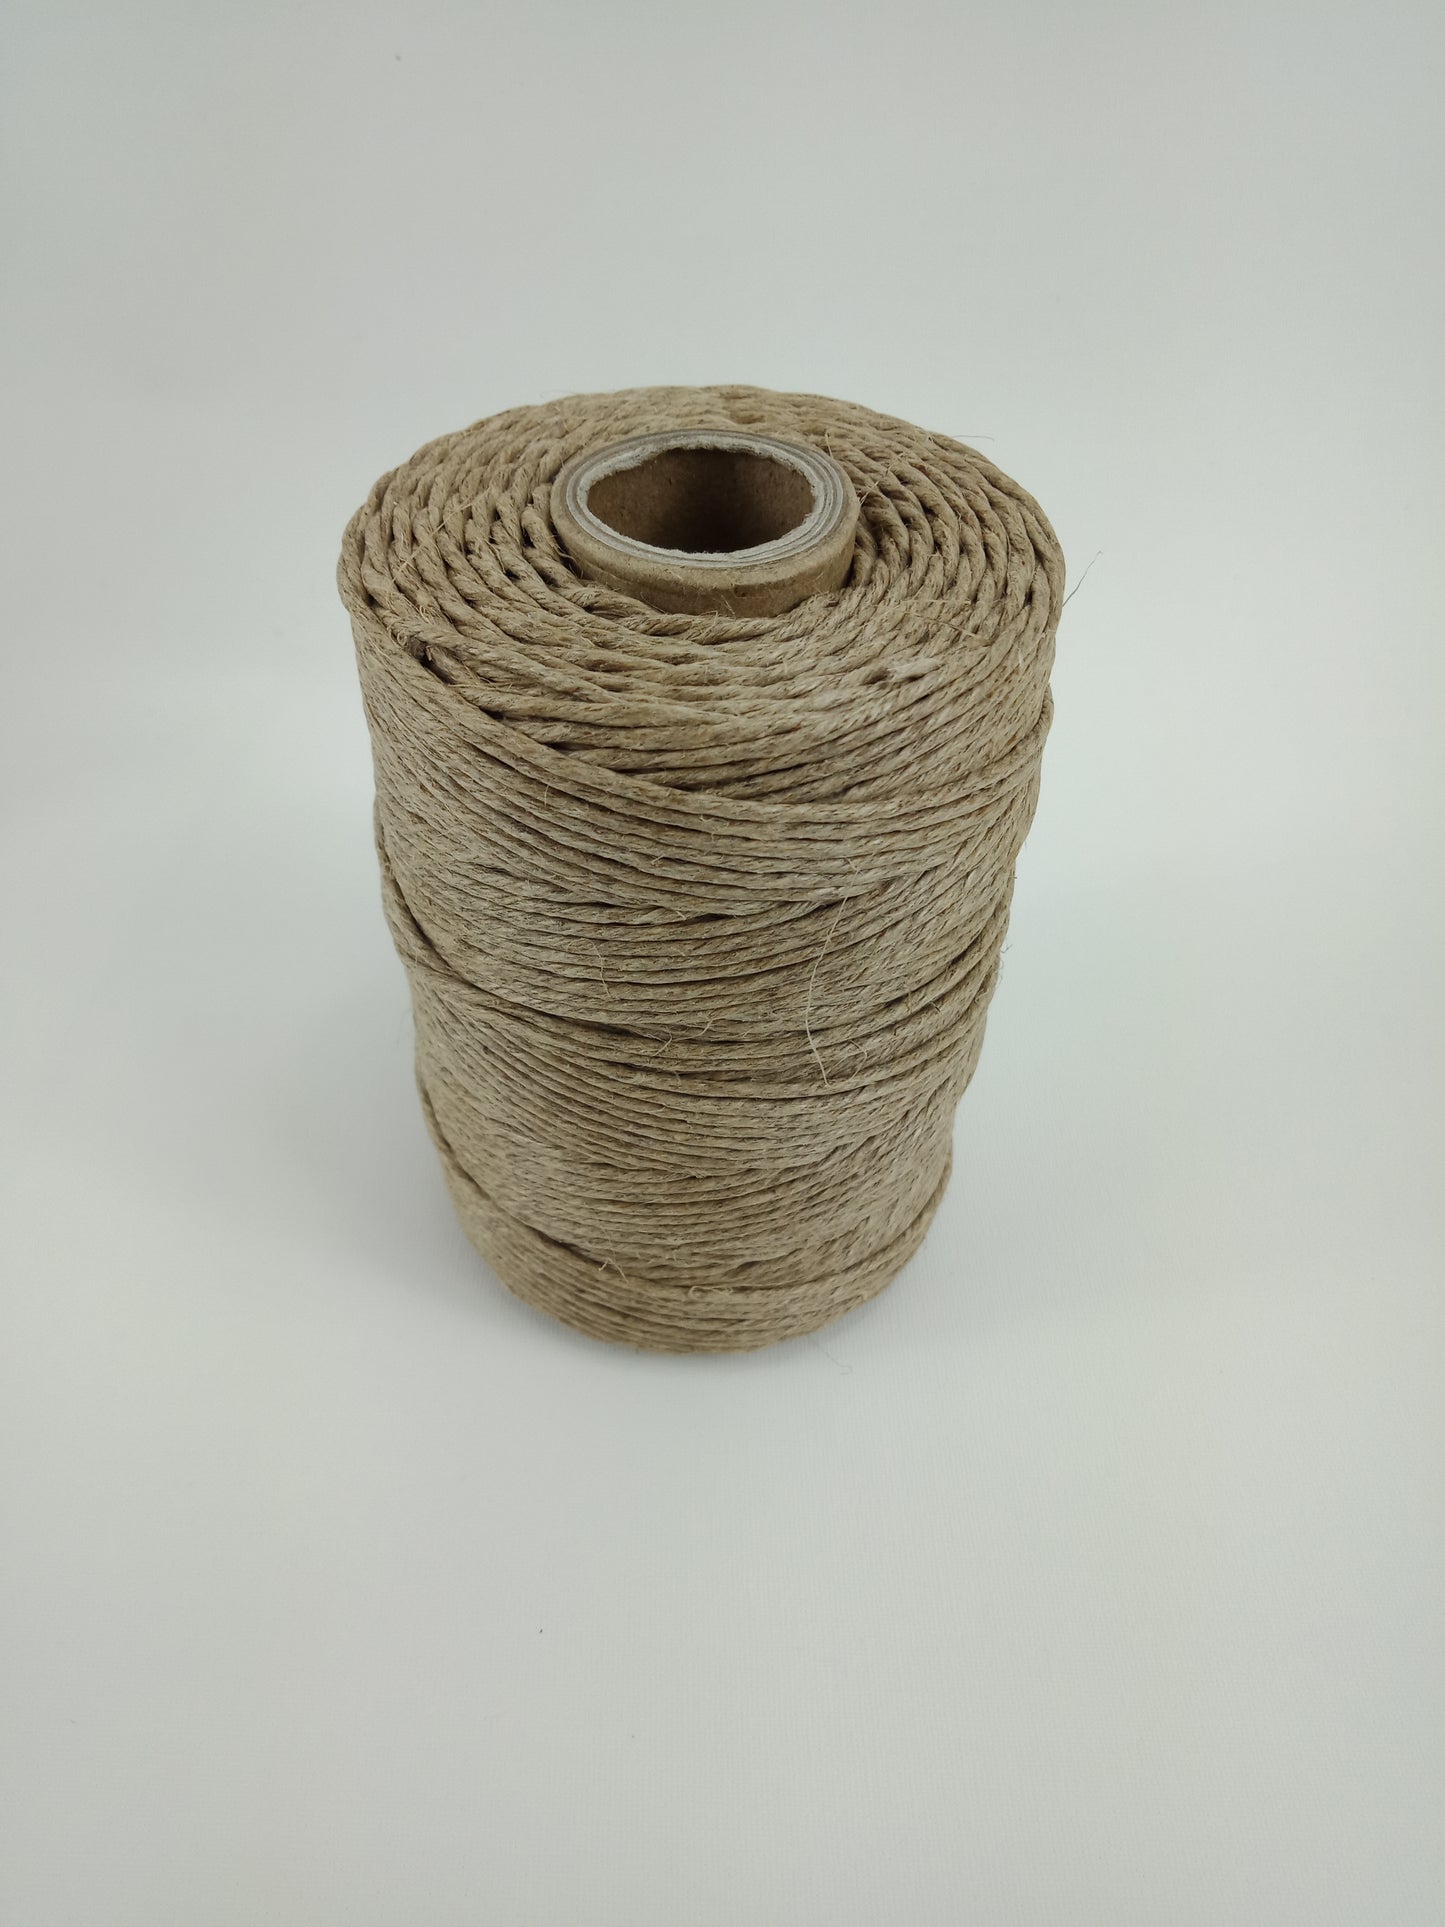 Bookbinding Flax Sewing Cord- Approx 1.5mm Thick- 8/8 Ply